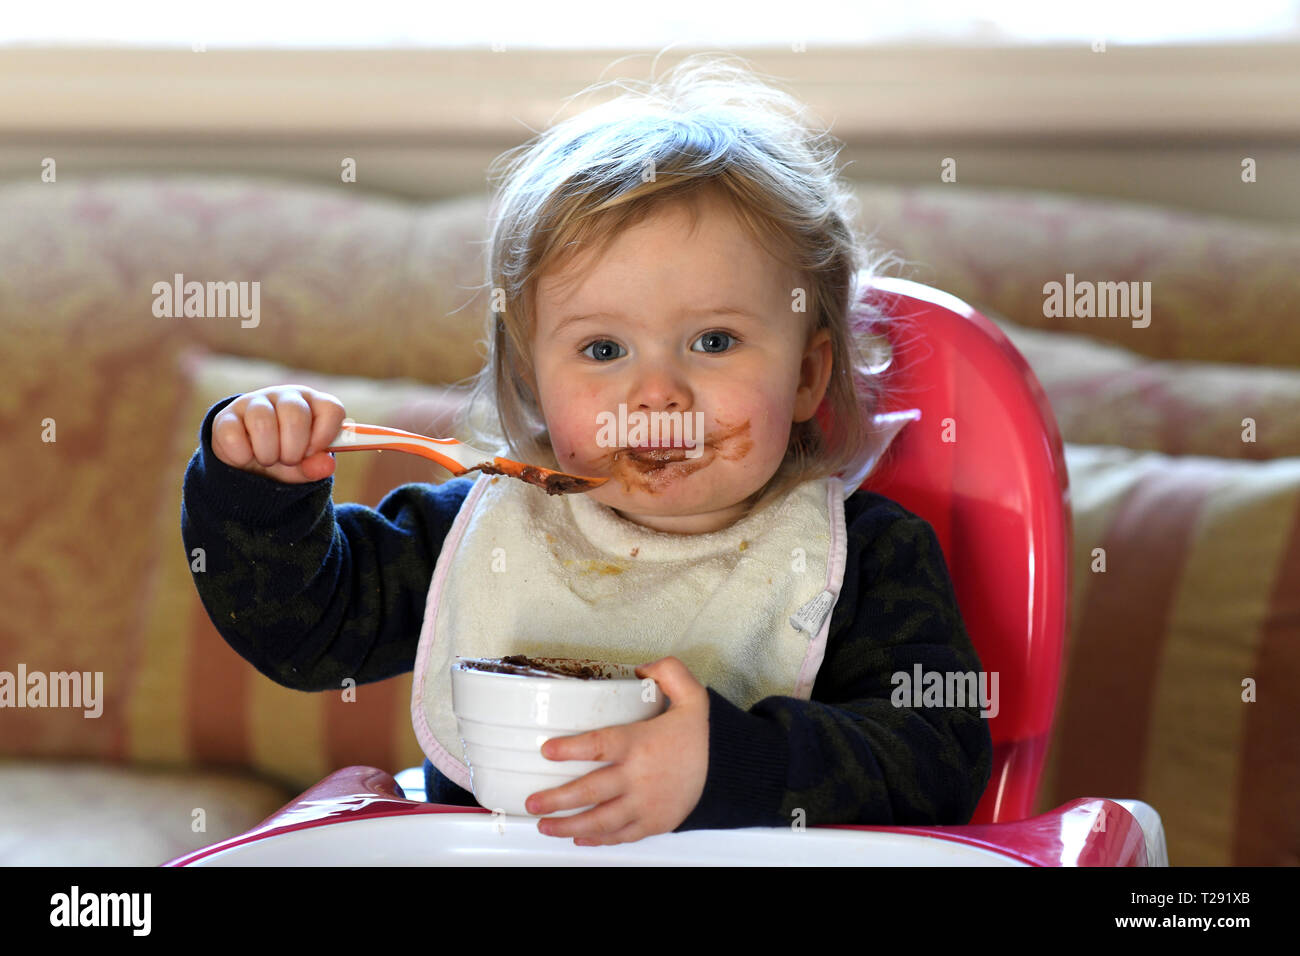 Baby girl feeding herself with chocolate on her face Stock Photo